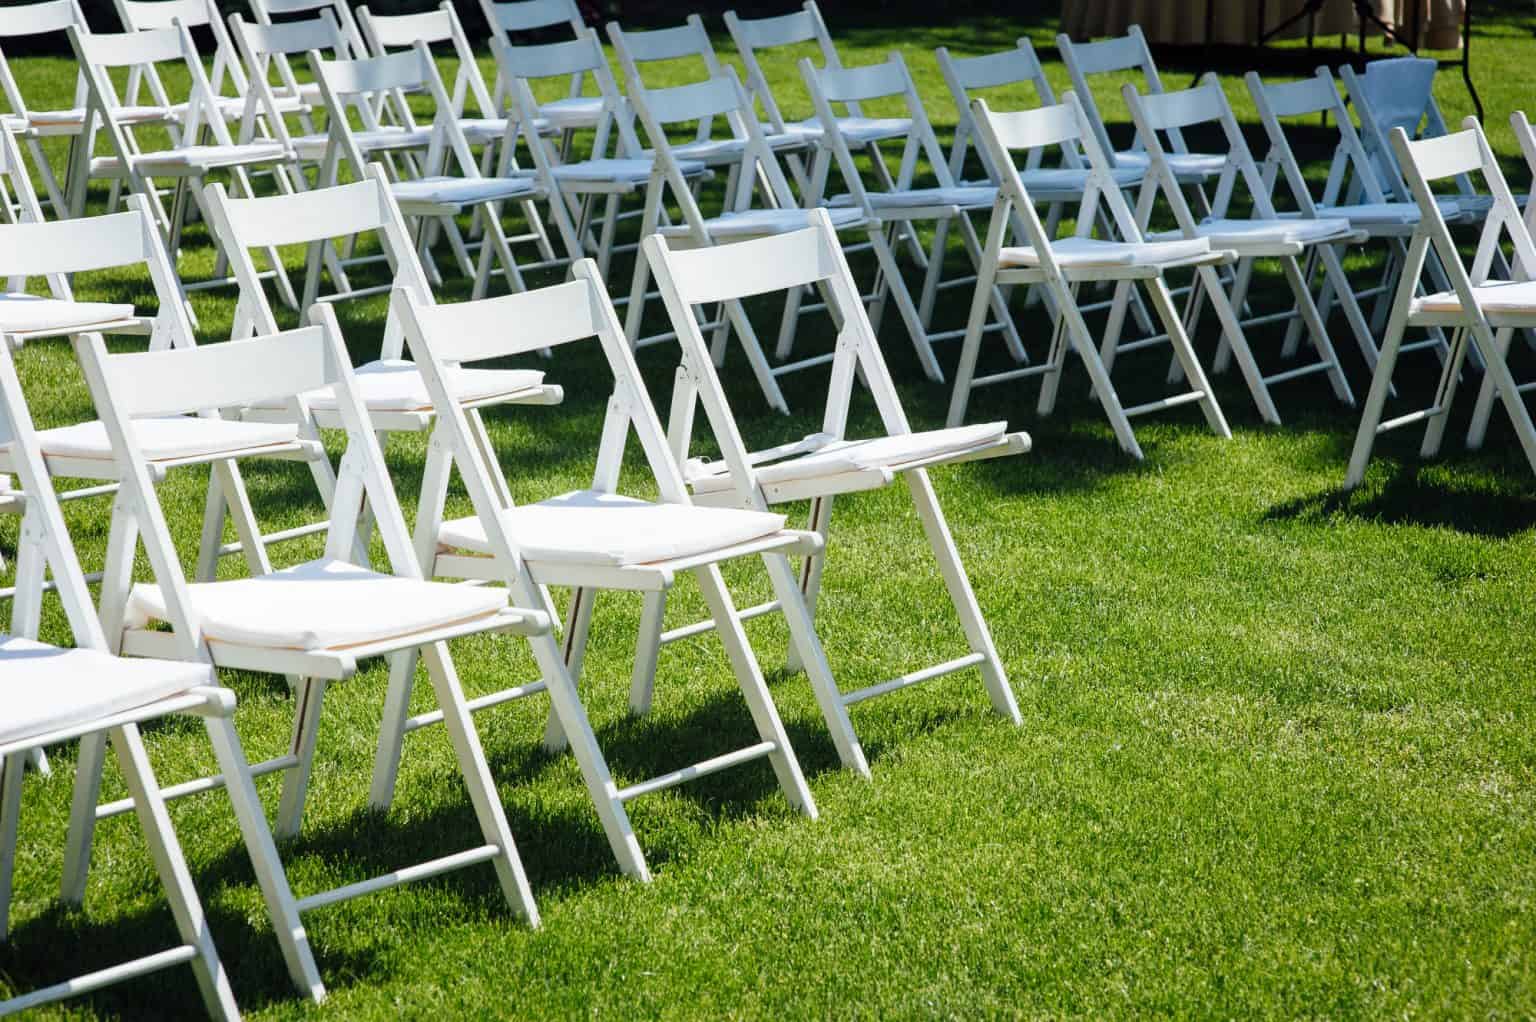 How To Keep Chairs From Sinking In Grass